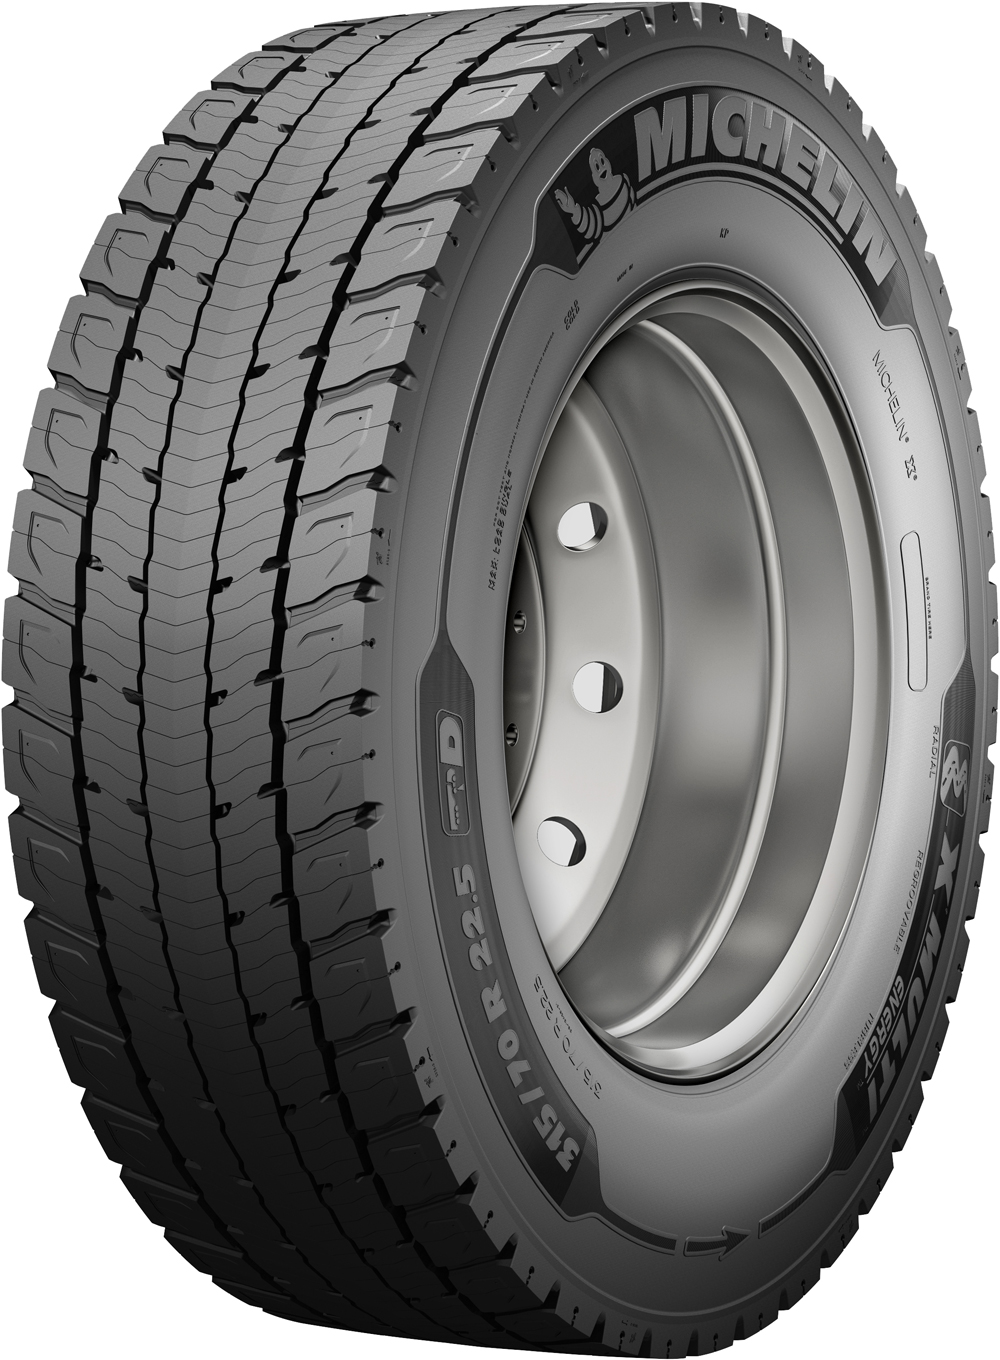 product_type-heavy_tires MICHELIN X MULTI ENERGY D 20 TL 315/80 R22.5 156L